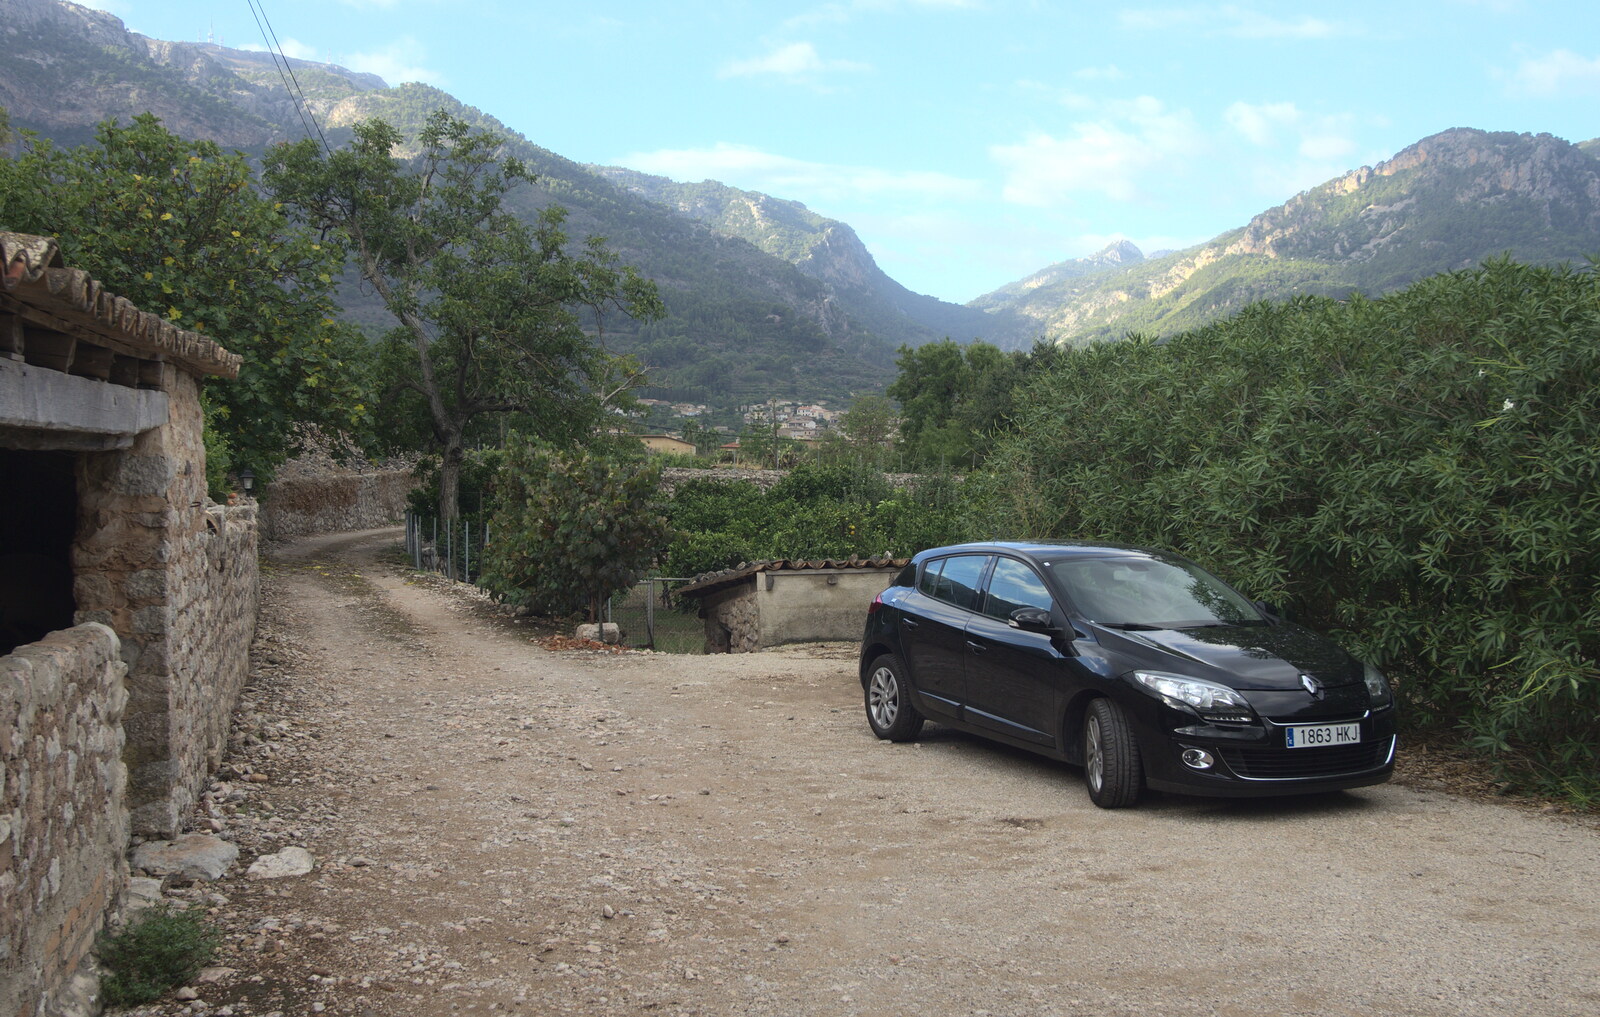 The hire car, and the drive that's only 5cm wider from A Few Hours in Valdemossa, Mallorca, Spain - 13th September 2012